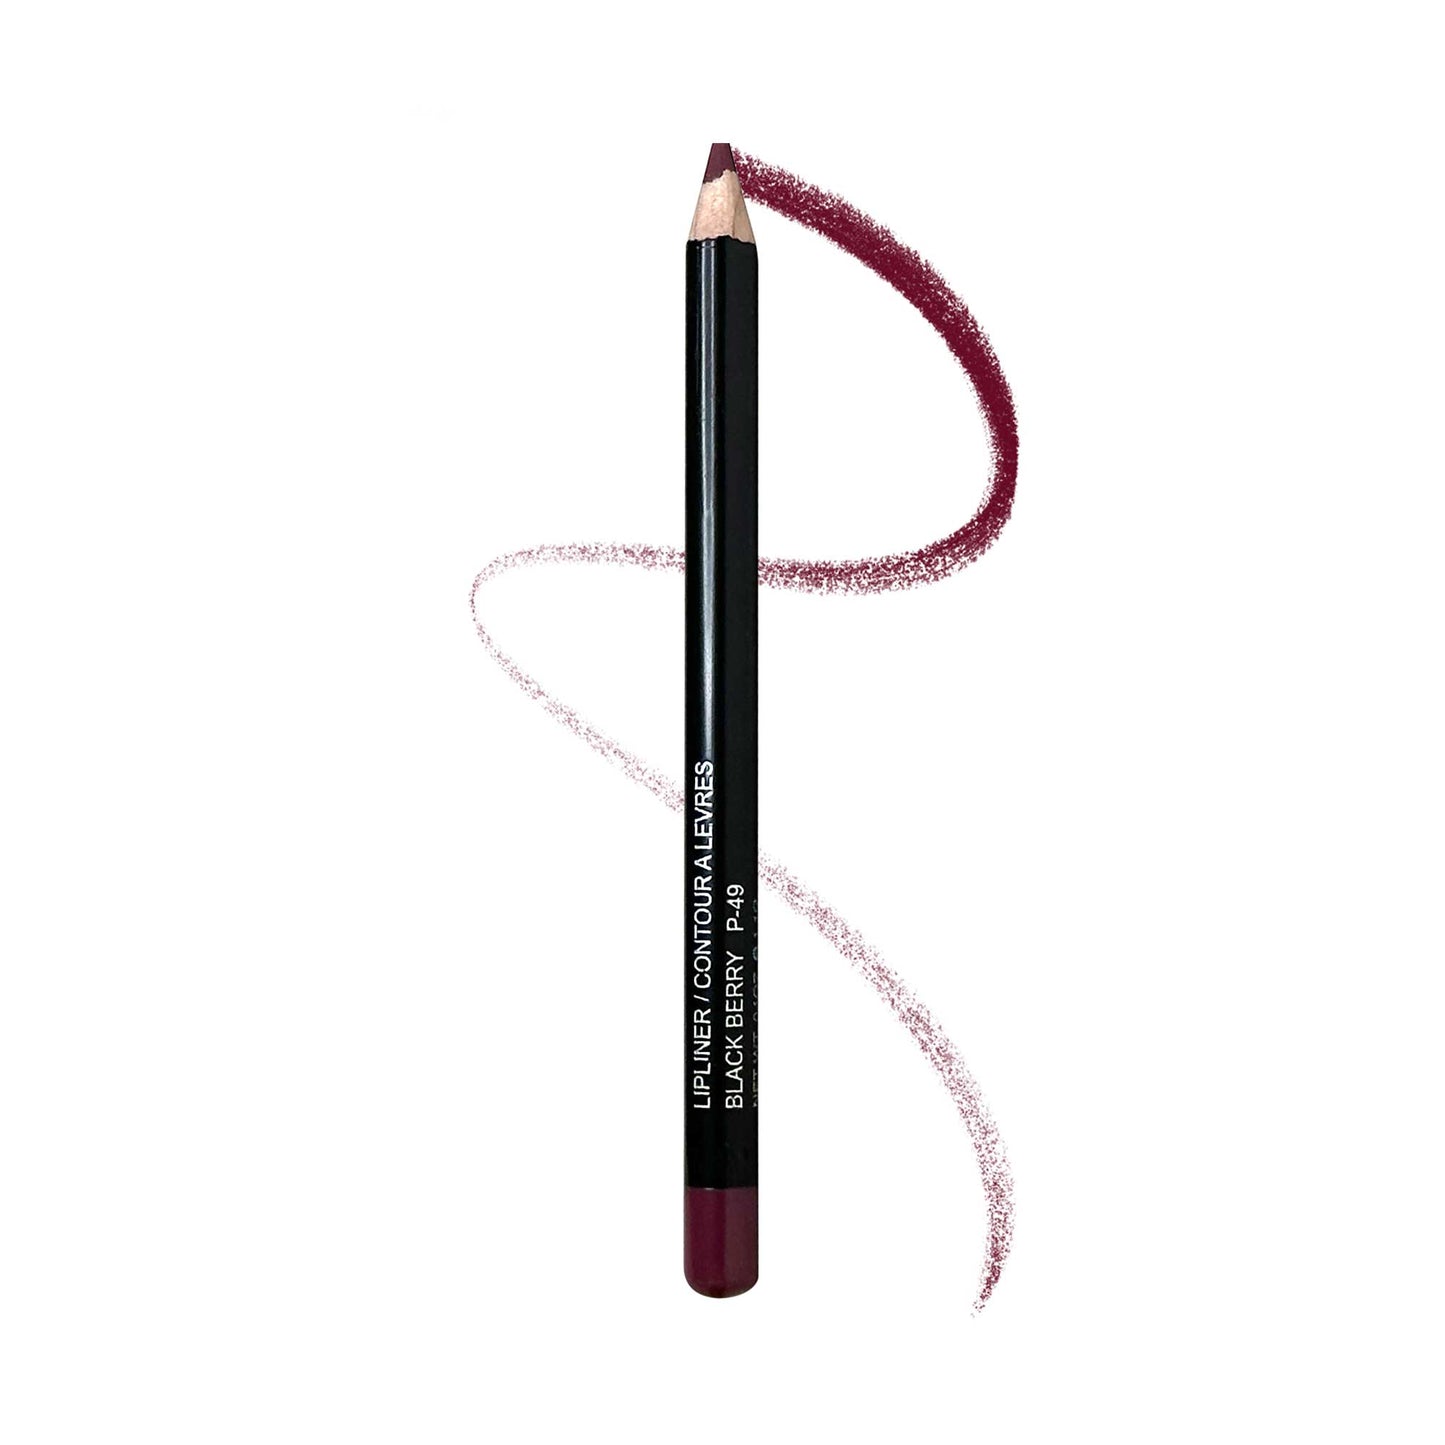 Looking to reshape and resize your lips? Look no further – our Cruisin Organics Black Berry Lip Liner is here. Infused with beeswax and seed oils, this no-smudge, long-lasting formula is the perfect liner with a rich, creamy texture. The high-impact, rich pigments are the perfect tinted base for your favorite lipstick. You can easily create a fuller smile and a bigger pout as you smoothe over your lips. With our Lip Liner, a dreamy and pillowy lip is never out of reach